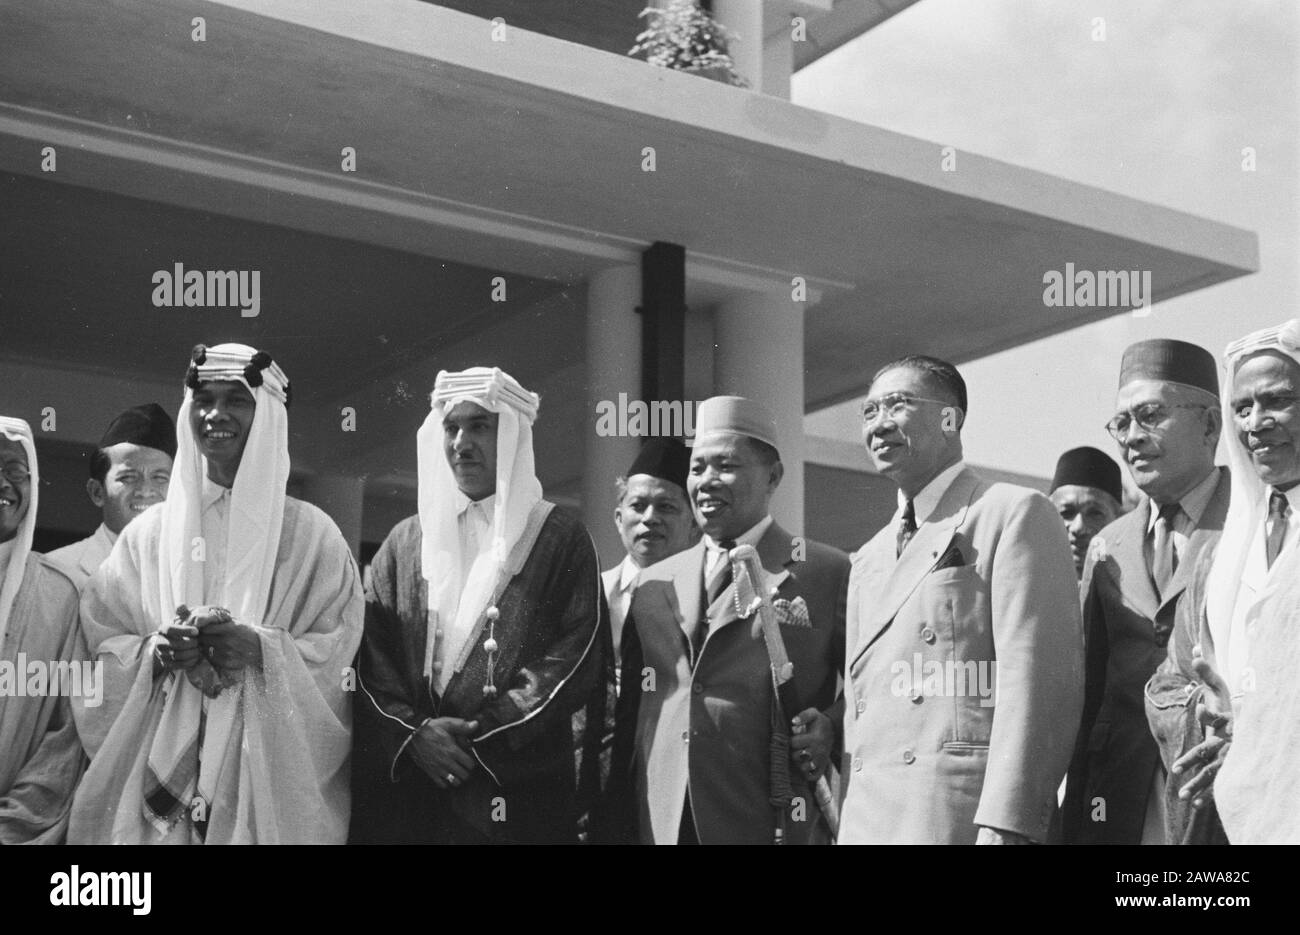 Makassar. Visit of Prime Minister Beel; Troops Relocation; Hadji Sword; Major General Sas  Makassar: On Dec 12. was at the palace to Makassar transmission instead of the good sword. A gift from King Saud Al Ib brought by Eremissie Pilgrims of eastern Indonesia. It was Hadji A.S. Bachmid to a.e. Seawati, president of the State of East Indonesia handed. Date: December 1948 Location: Indonesia Dutch East Indies Stock Photo